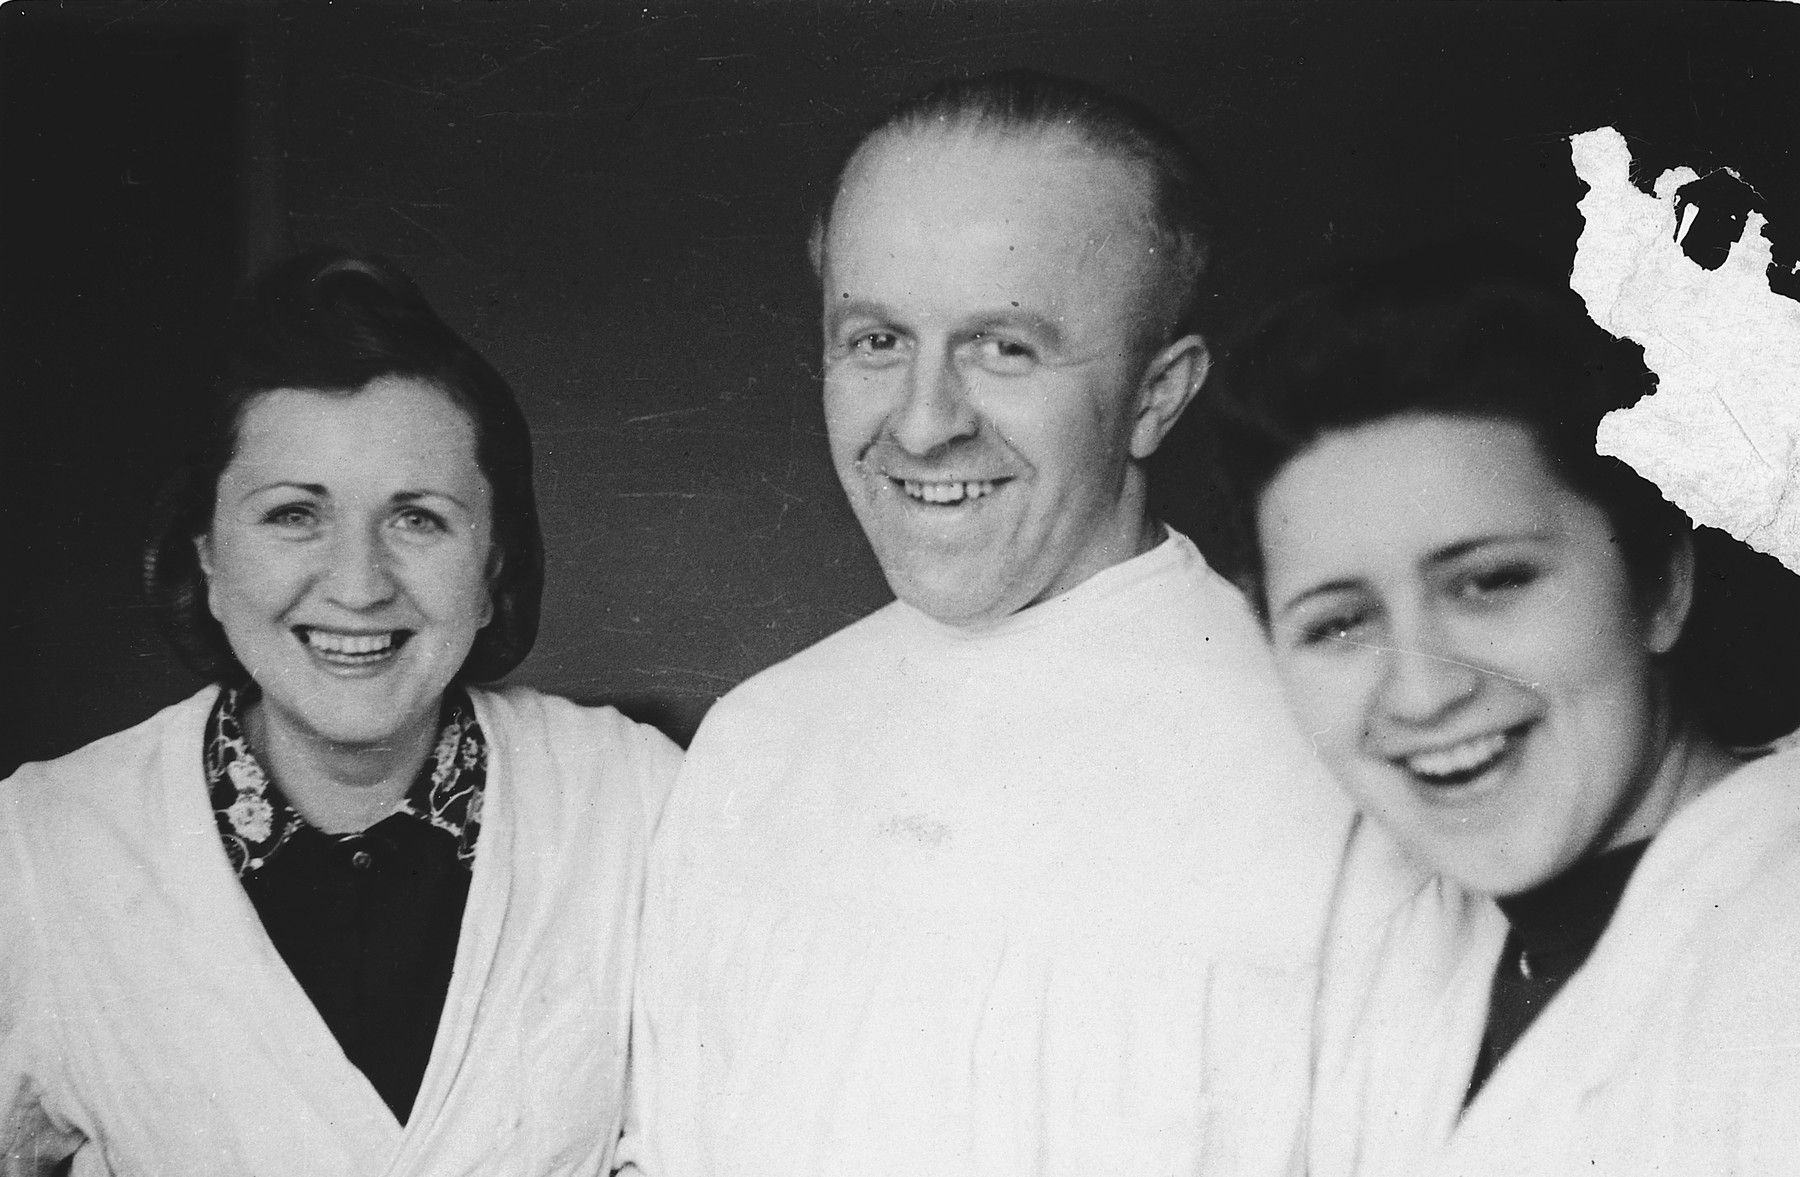 Lala Grunfeld poses with a Nazi dentist and another dental technician while hiding as a Polish woman in Warsaw.